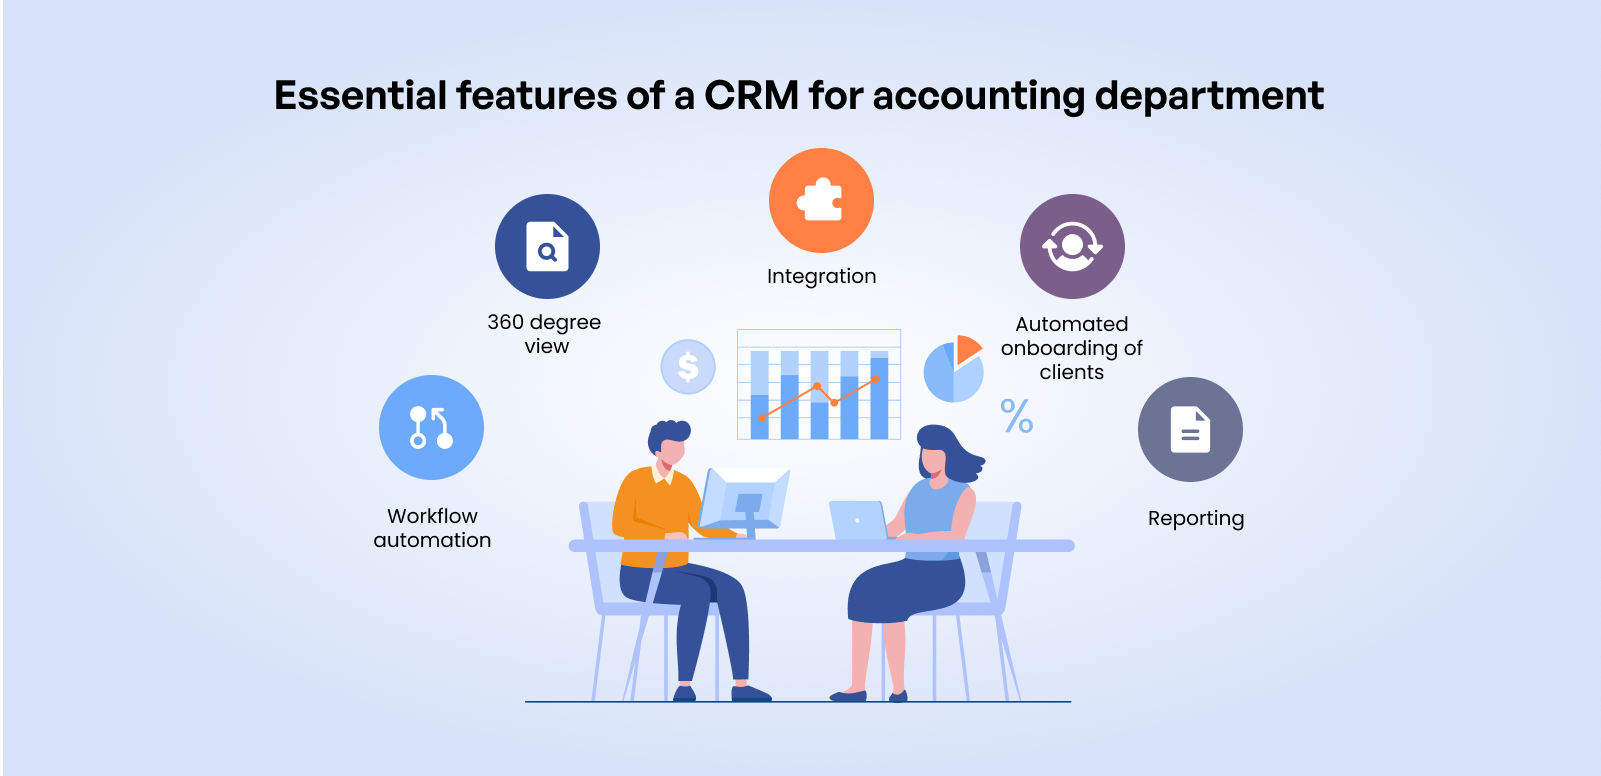 essential-features-crm-for-accounting-department (1).png